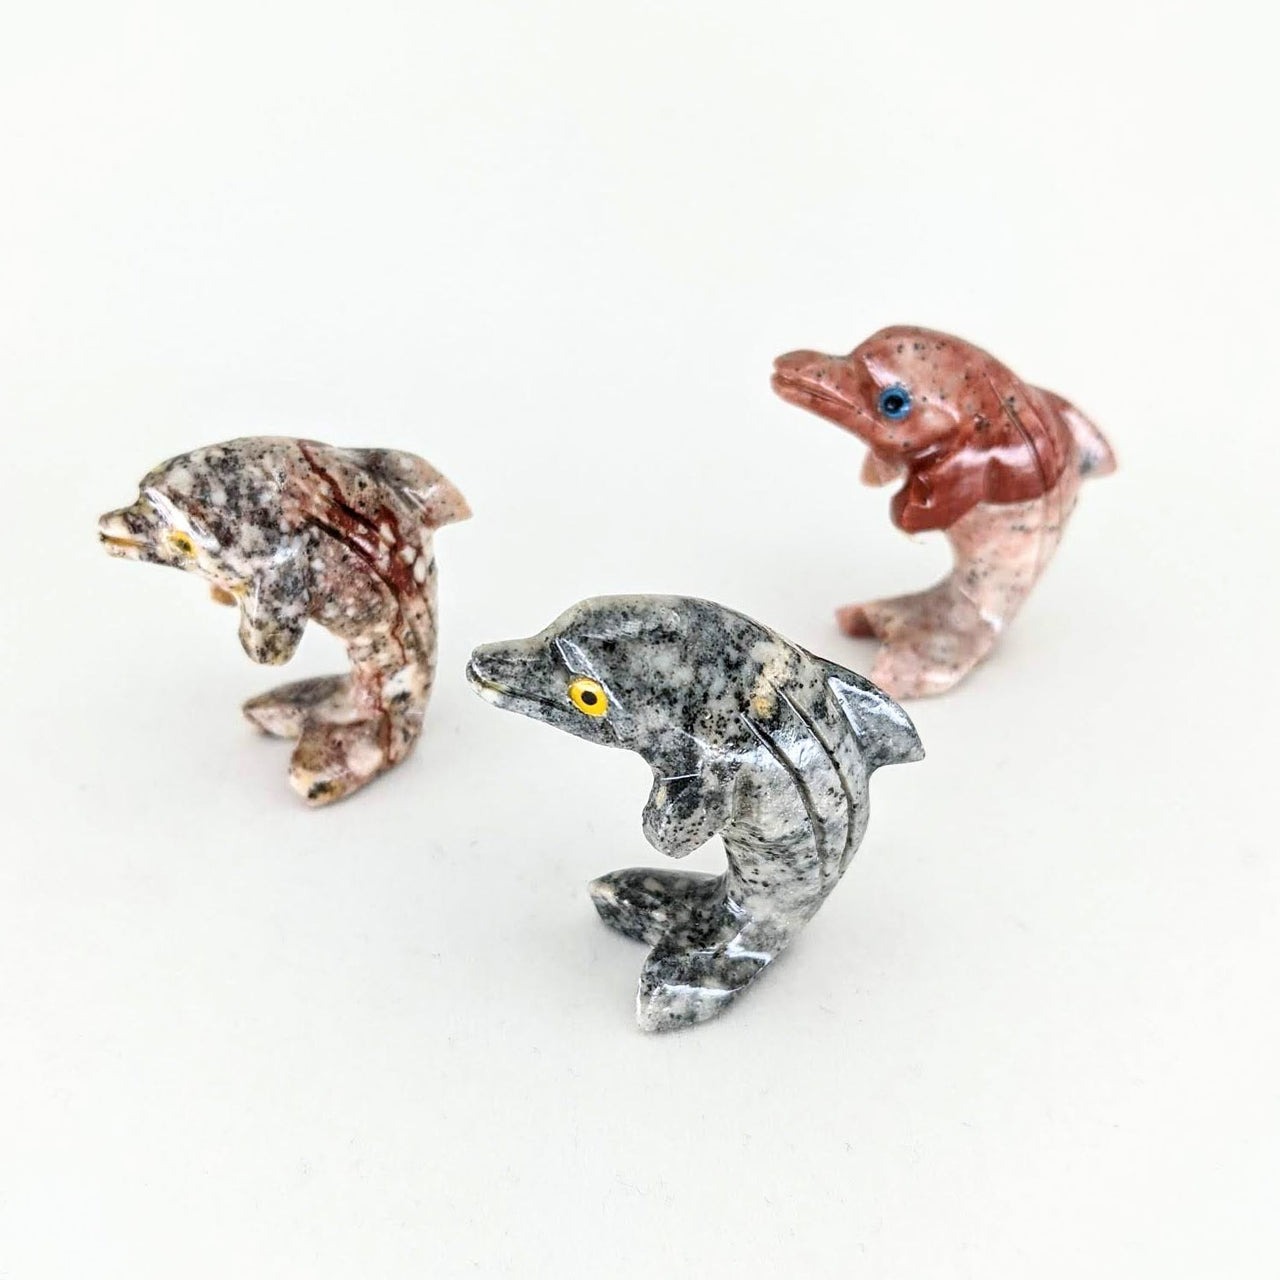 Soapstone Baby Animal Carving from Peru: three small glass animals on a white surface